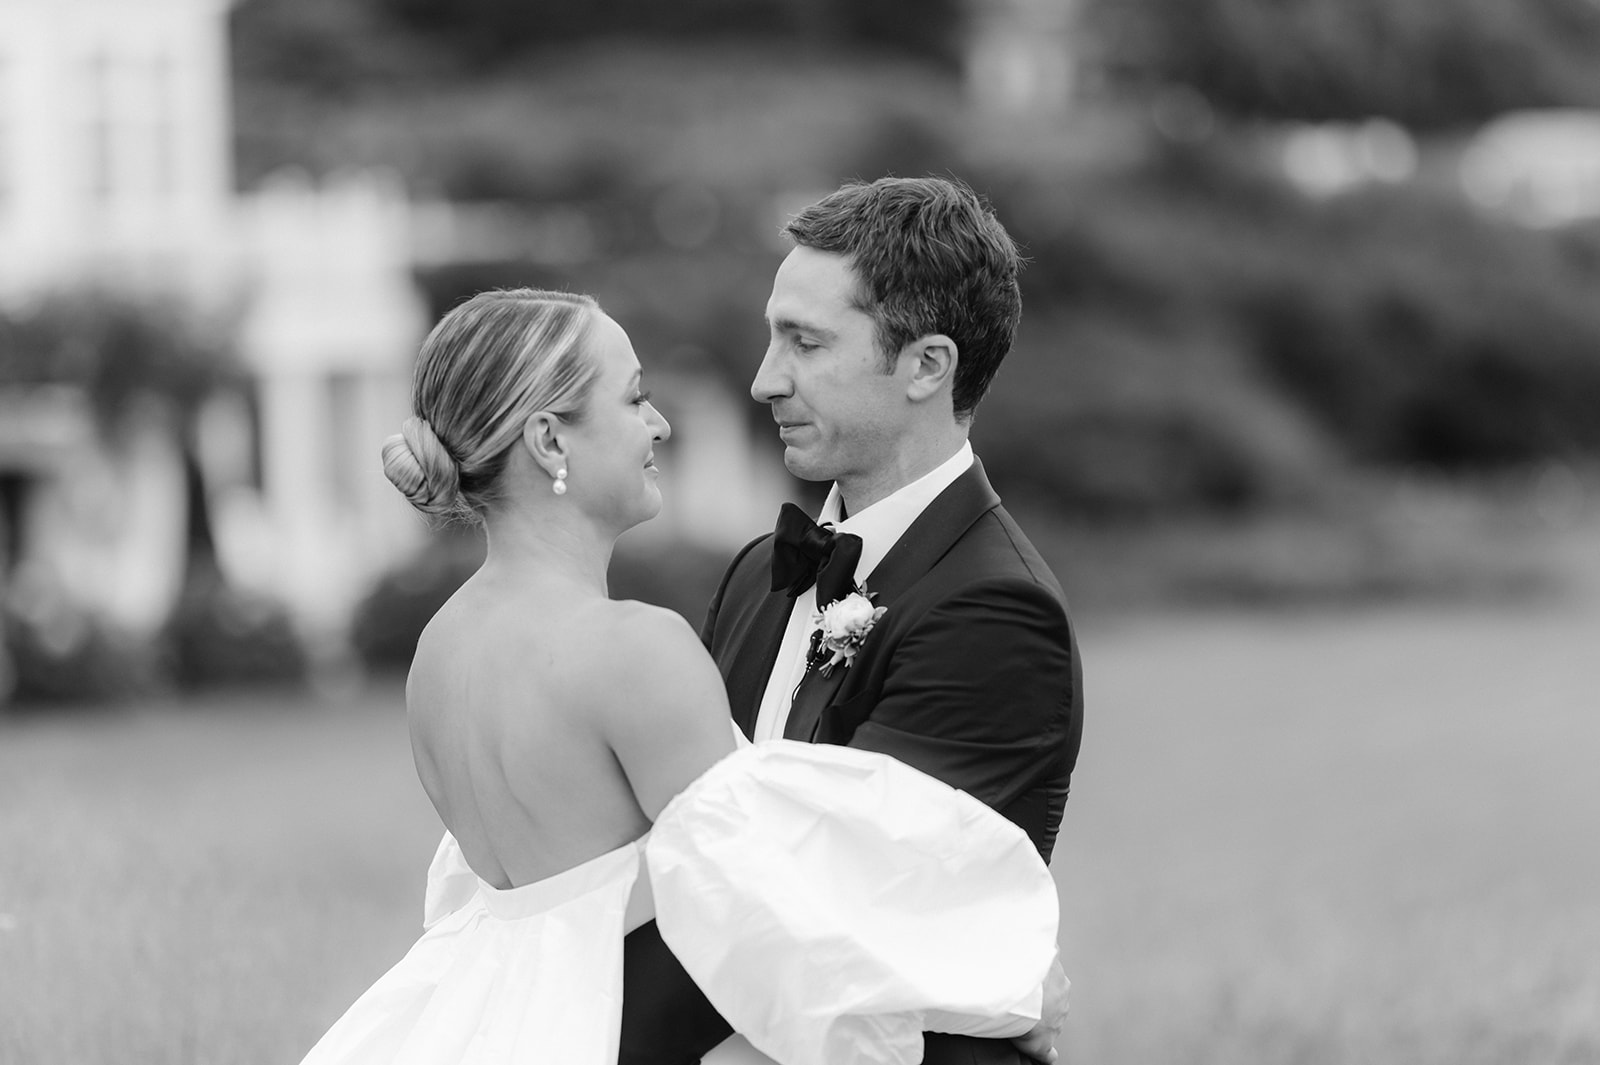 An emotional black and white photo of a bride and groom after their first look.